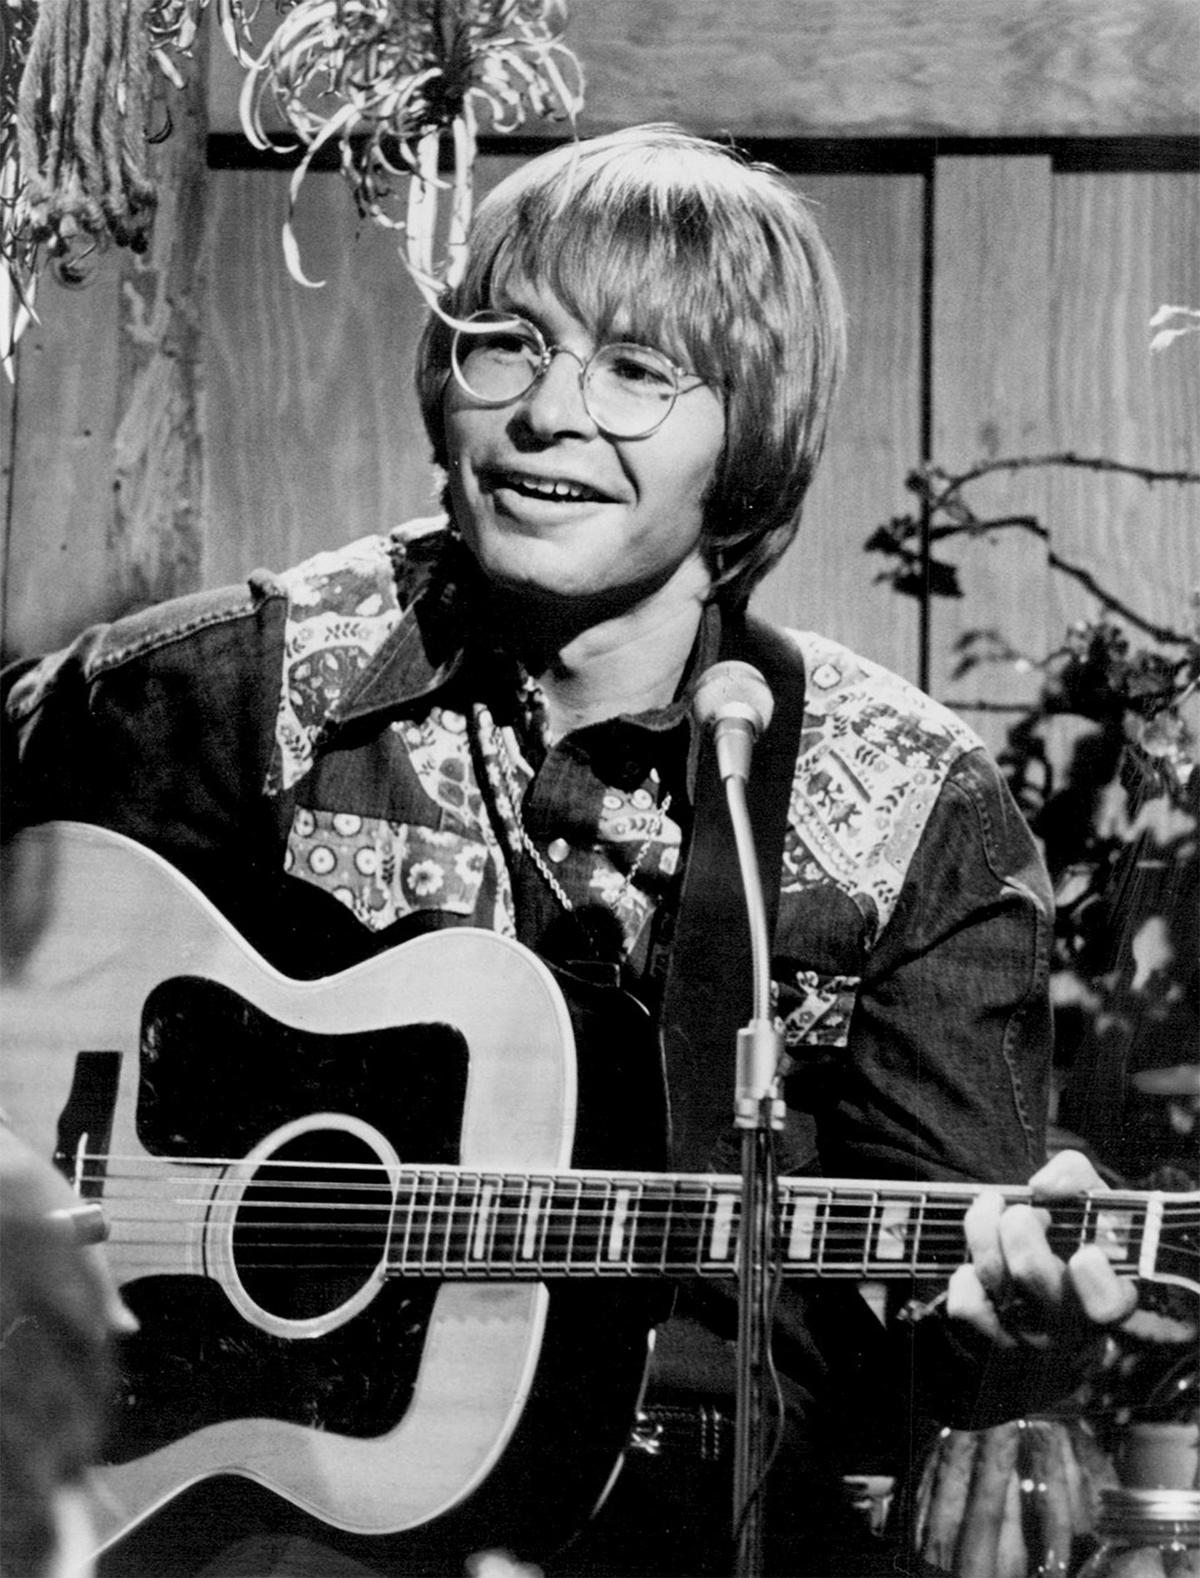 A photograph from John Denver's appearance on ABC's televised special "An Evening With John Denver," filmed on Feb. 18, 1975. (Public Domain)